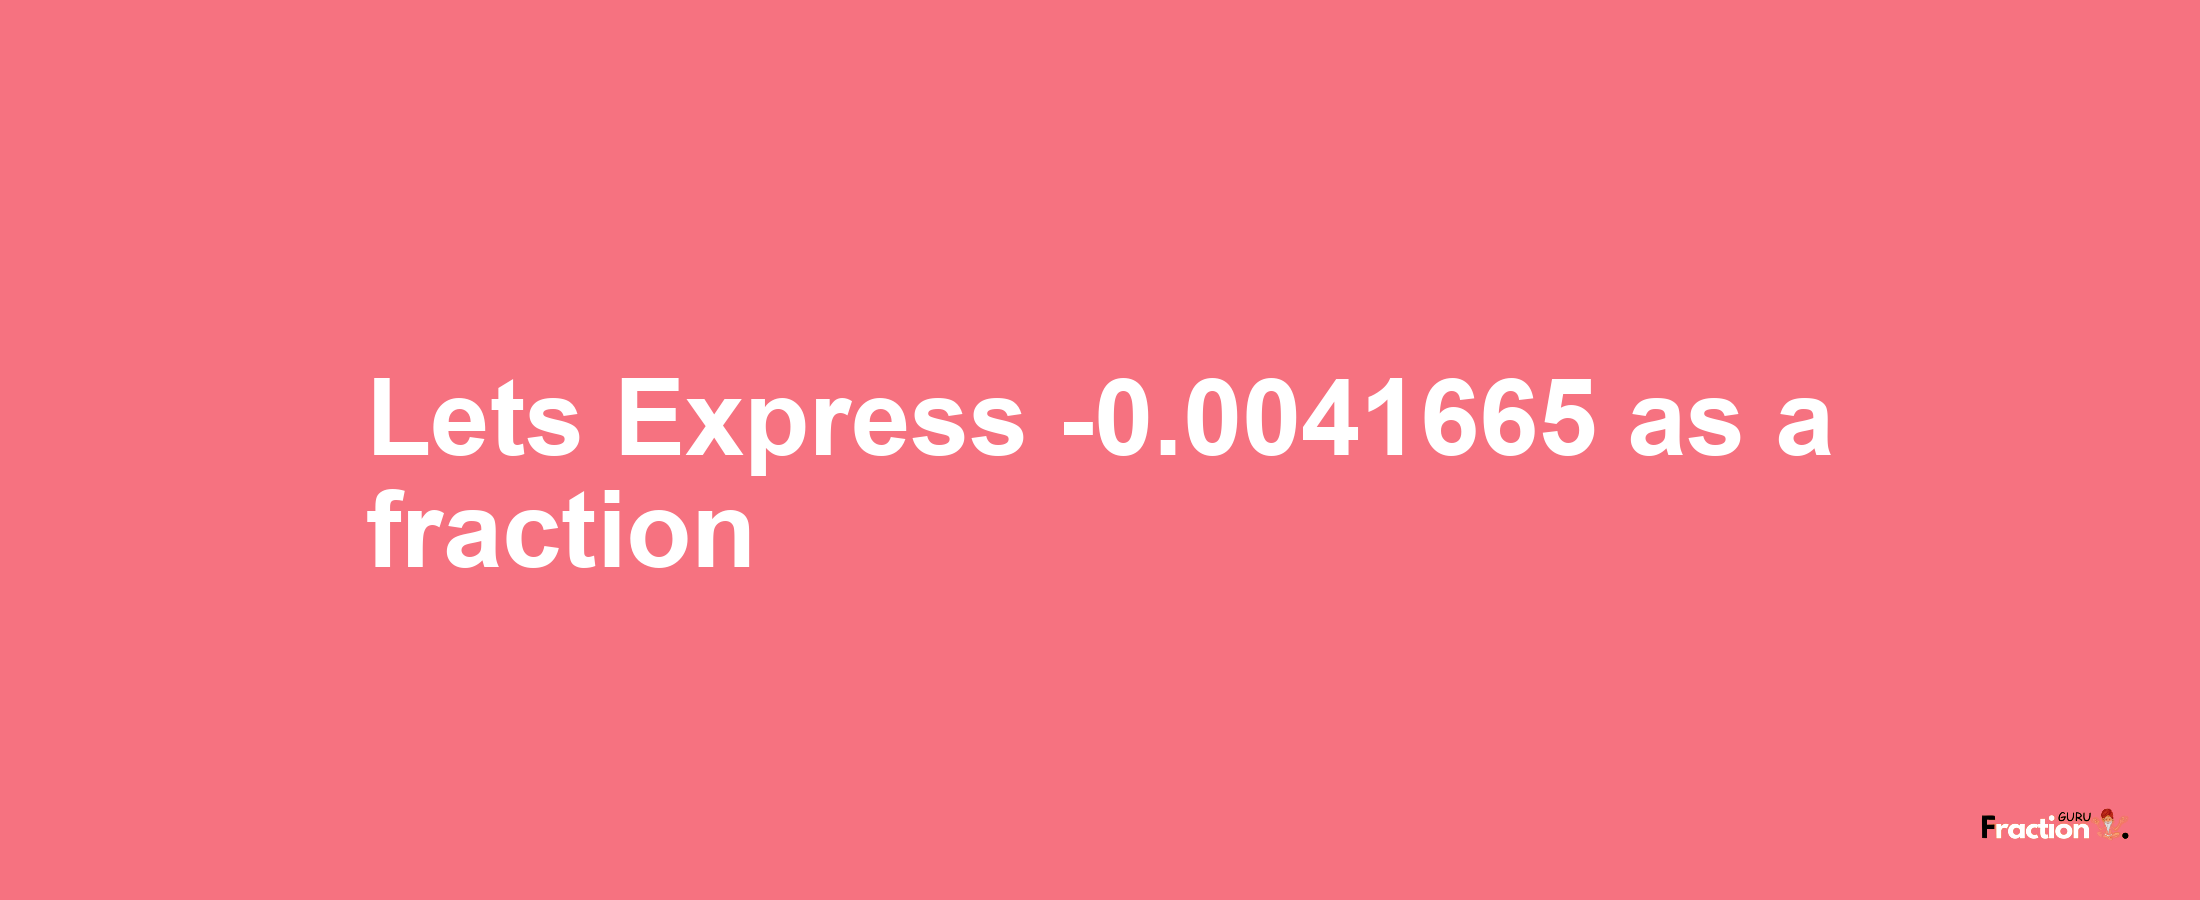 Lets Express -0.0041665 as afraction